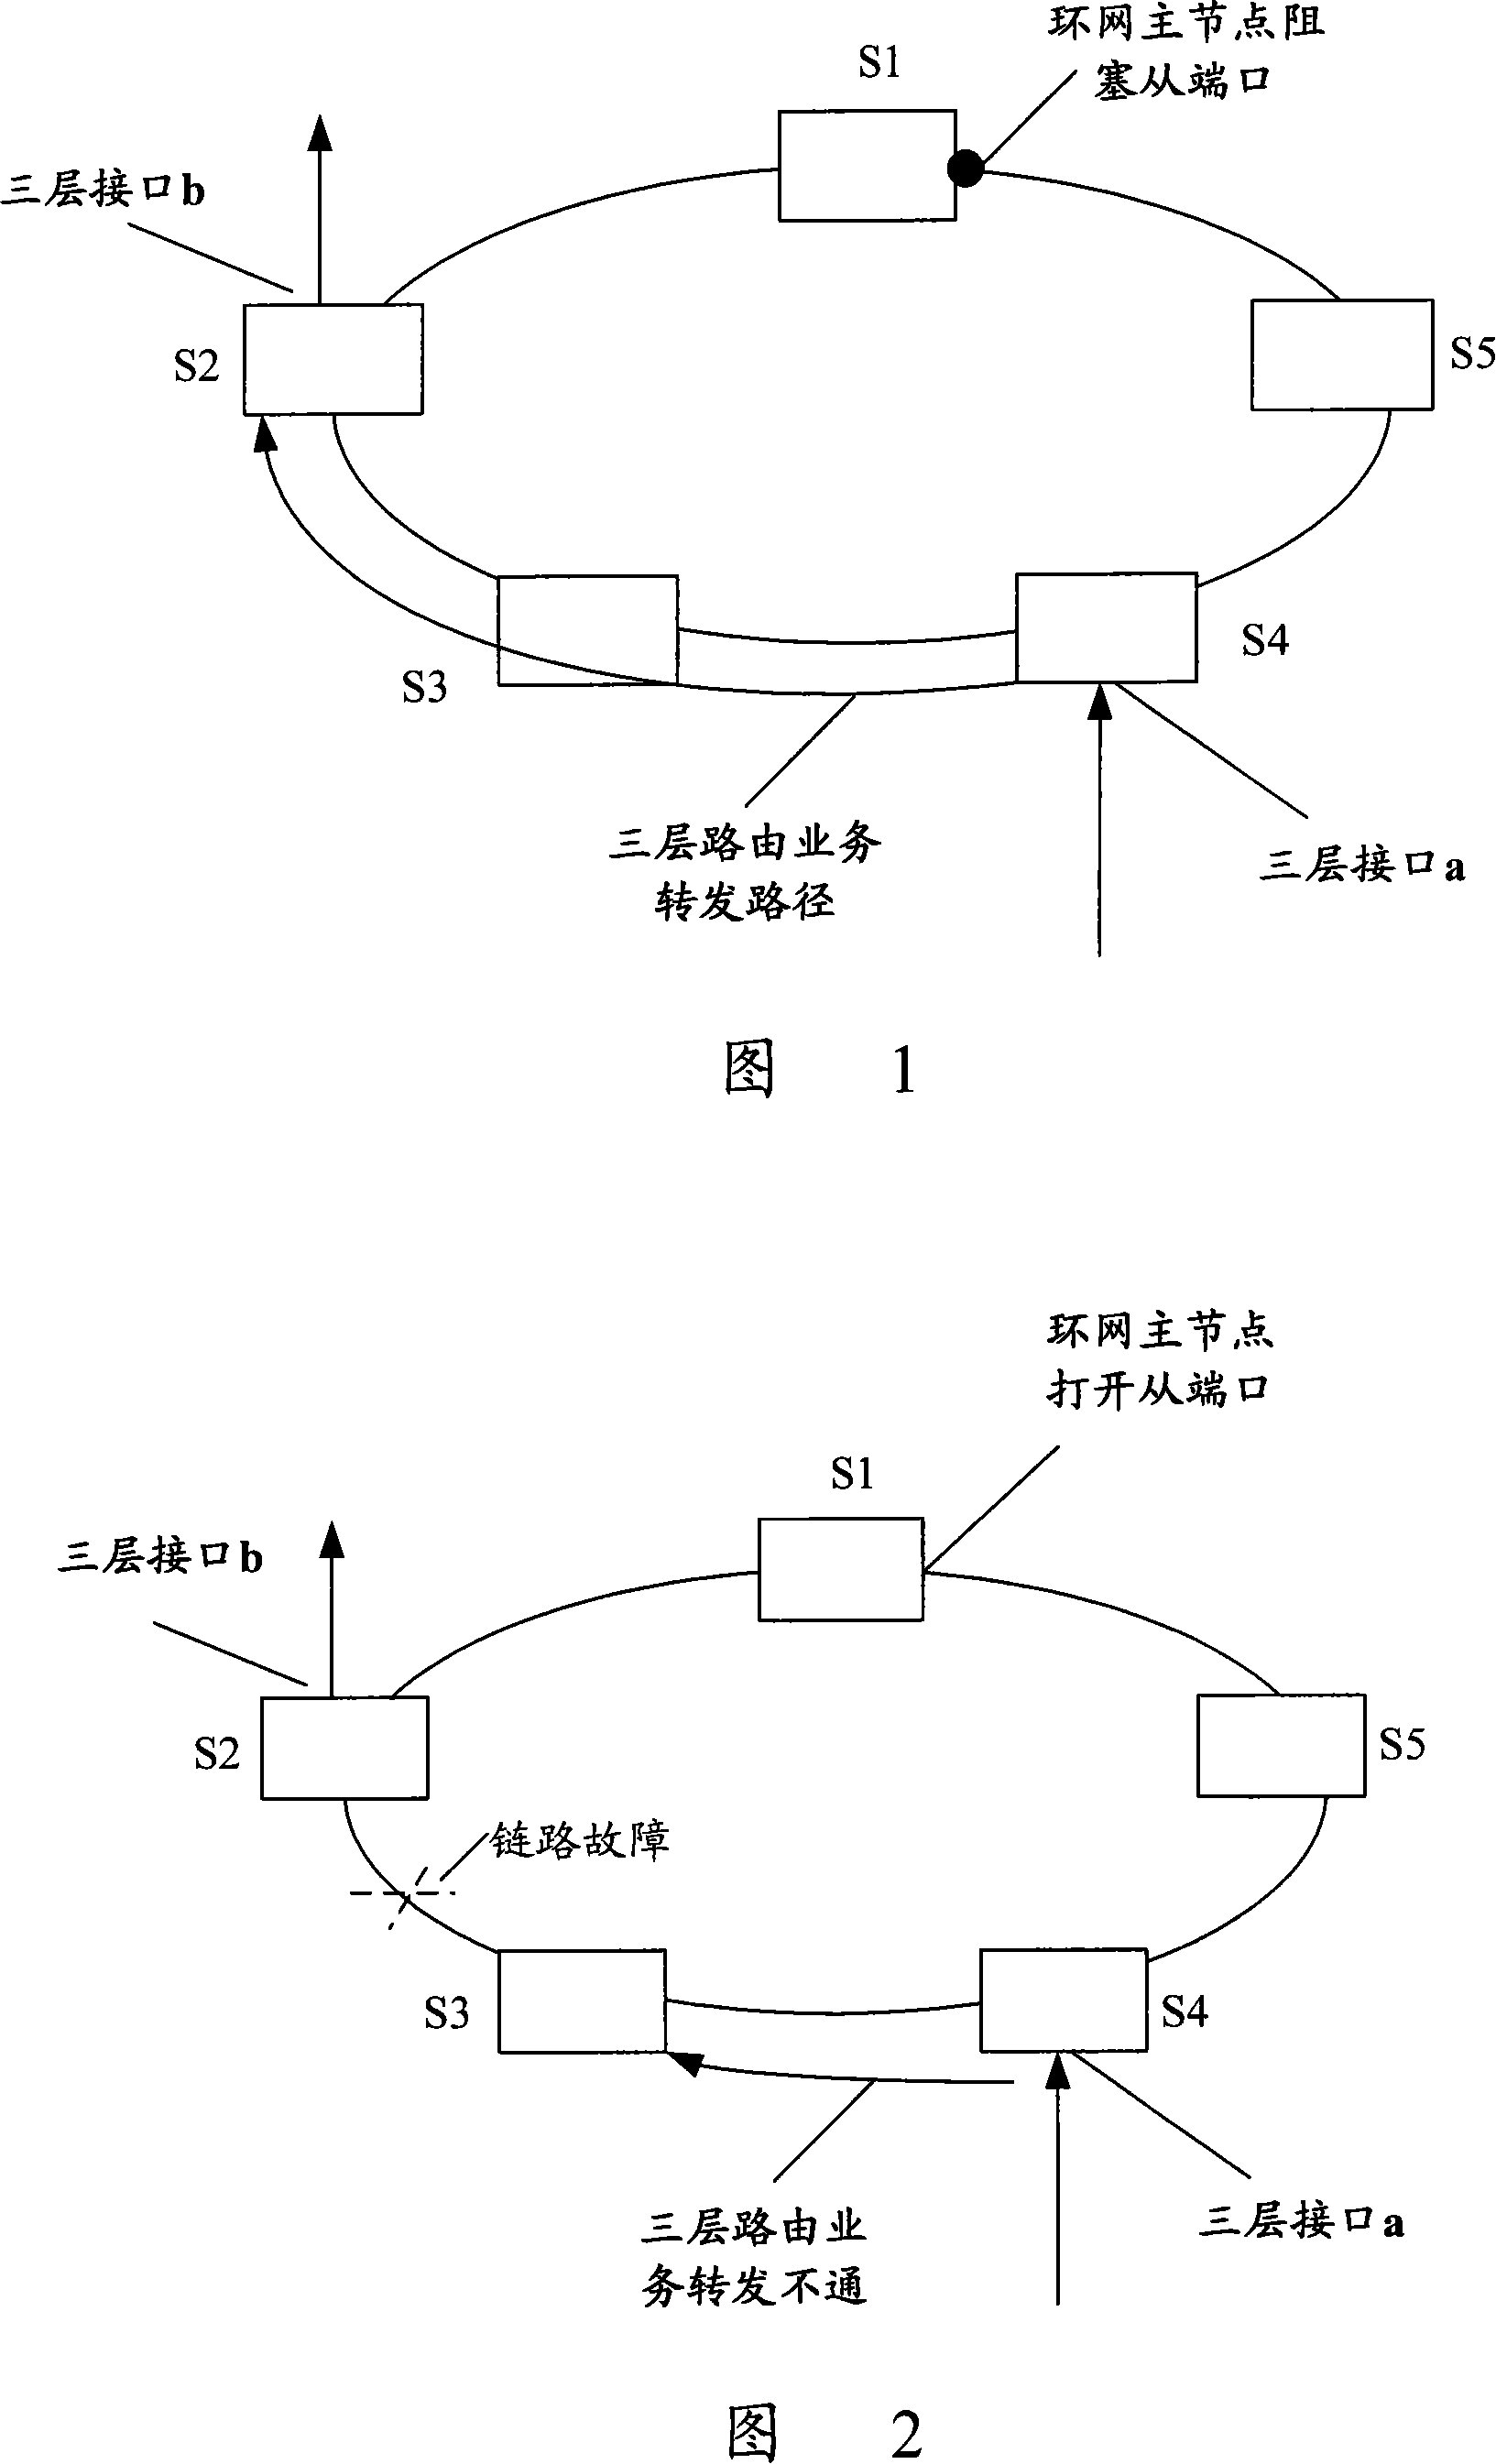 Ethernet ring network three-layer route forwarding fast switching method